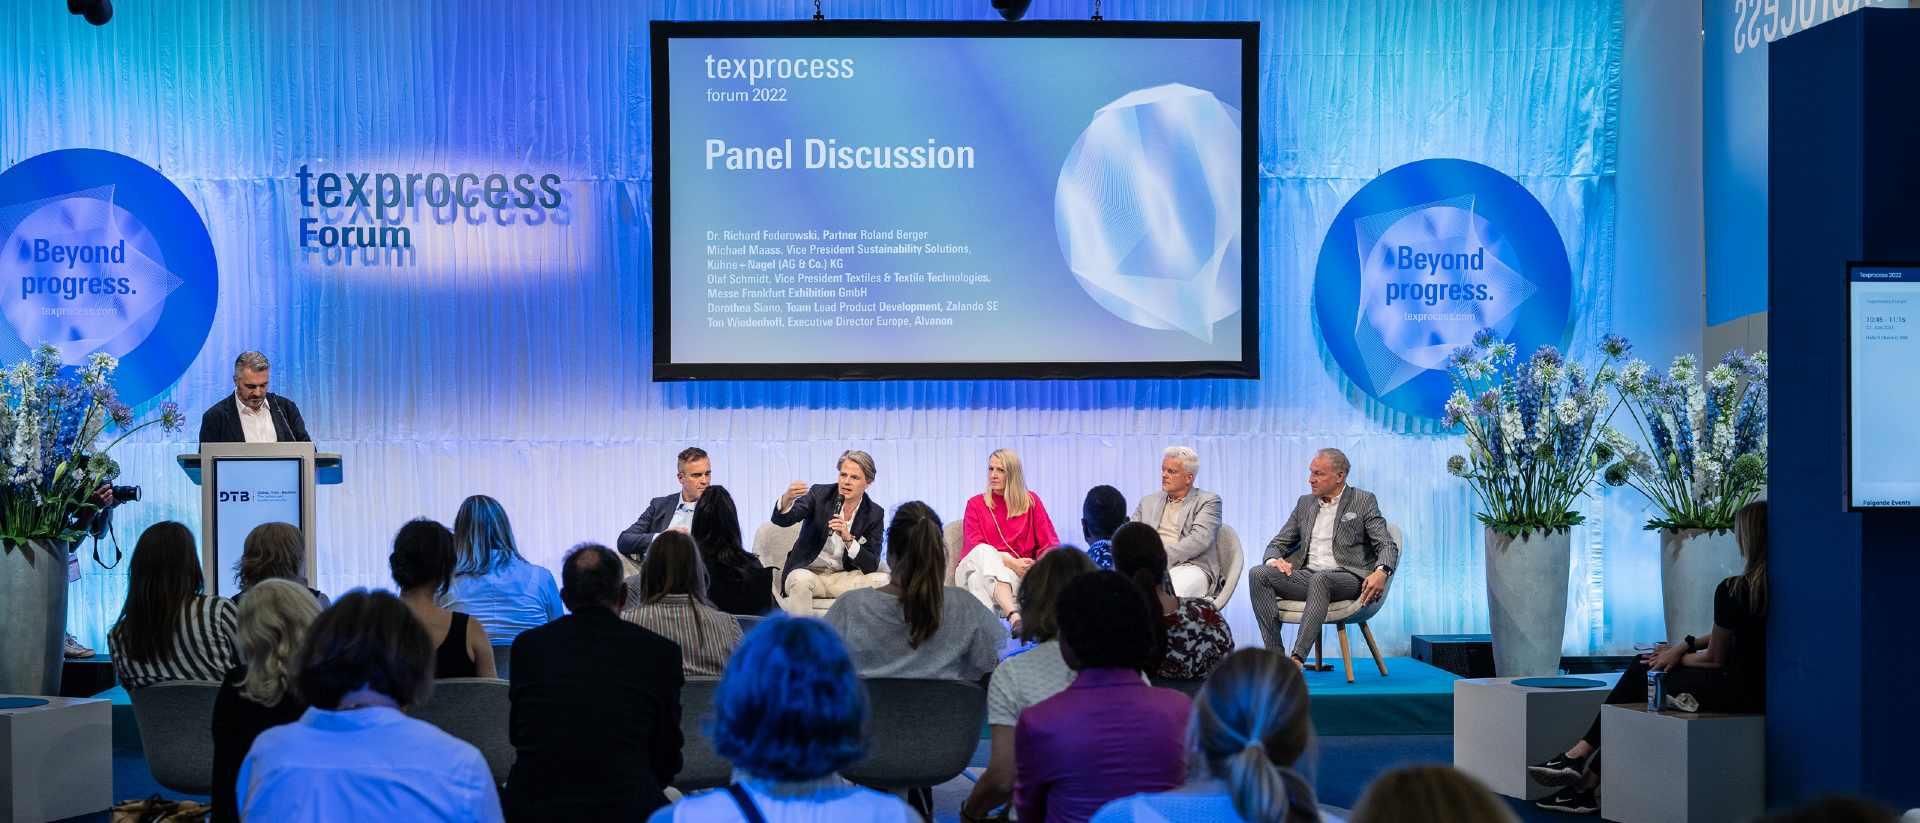 A panel discussion at Texprocess Forum